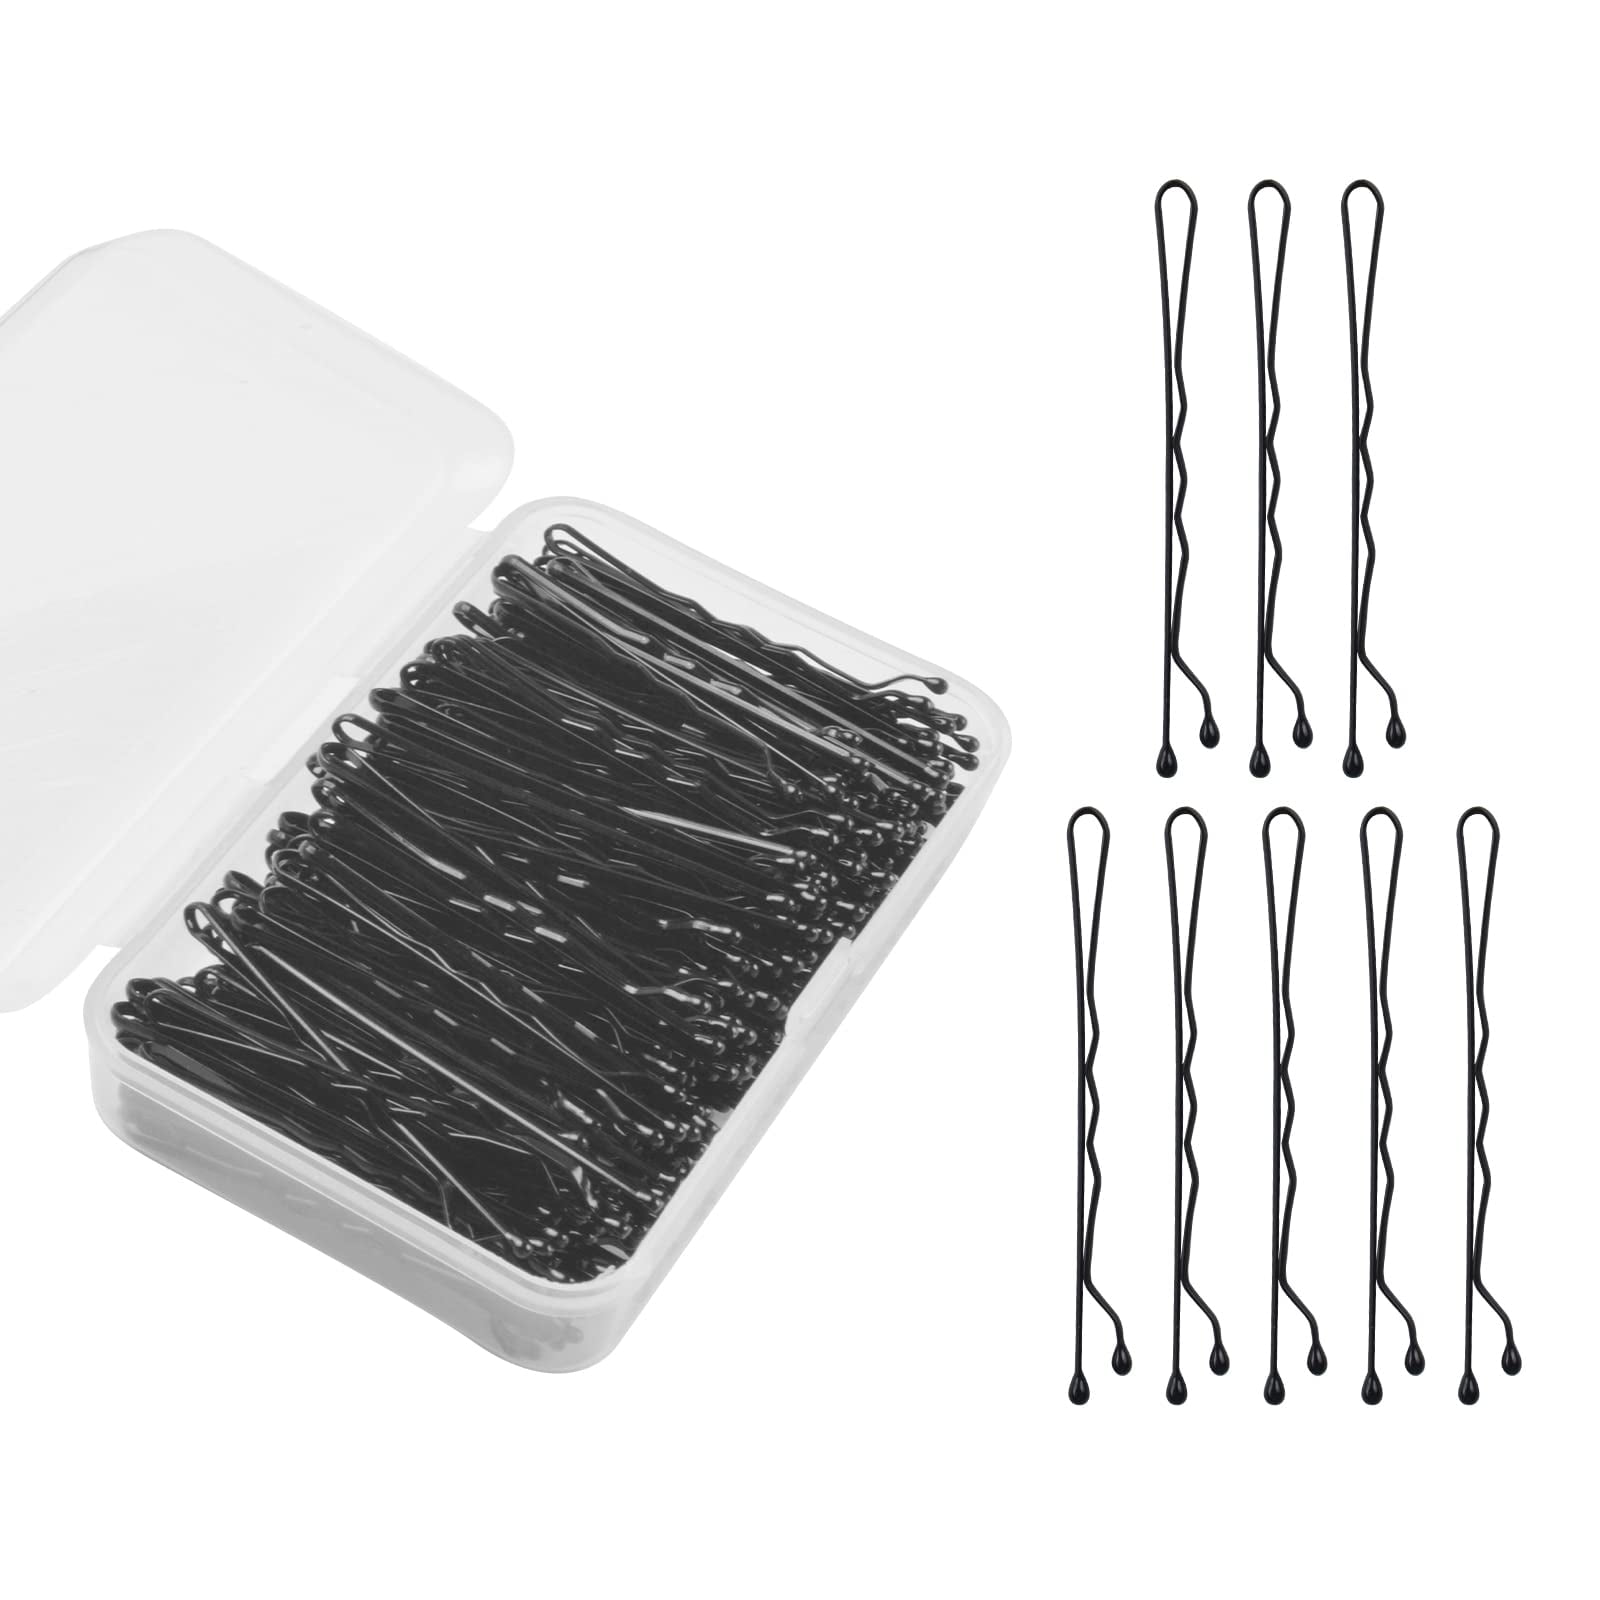  Teenitor Bobby Pins, 250Count Bobby Pins Brown for Women  Girls, 2Inch Bobby Pins Black Blonde Brown Silver, Hair Pins Bobby Pins  Blond Hair with Storage Box Bobby Pins Secure Hold 